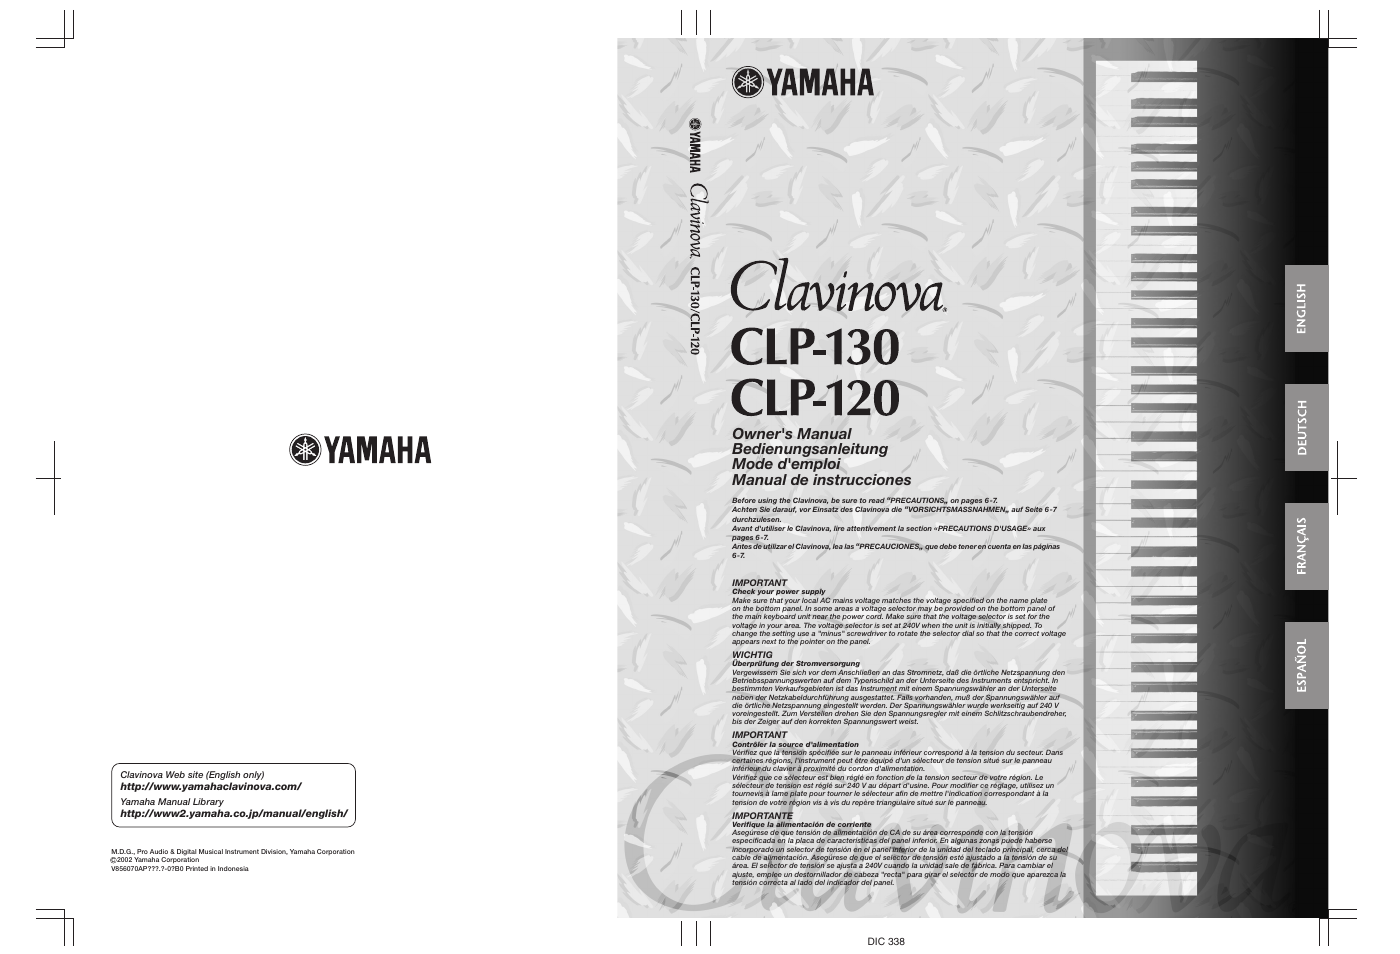 Yamaha CLP-130 User Manual | 80 pages | Also for: CLP-120